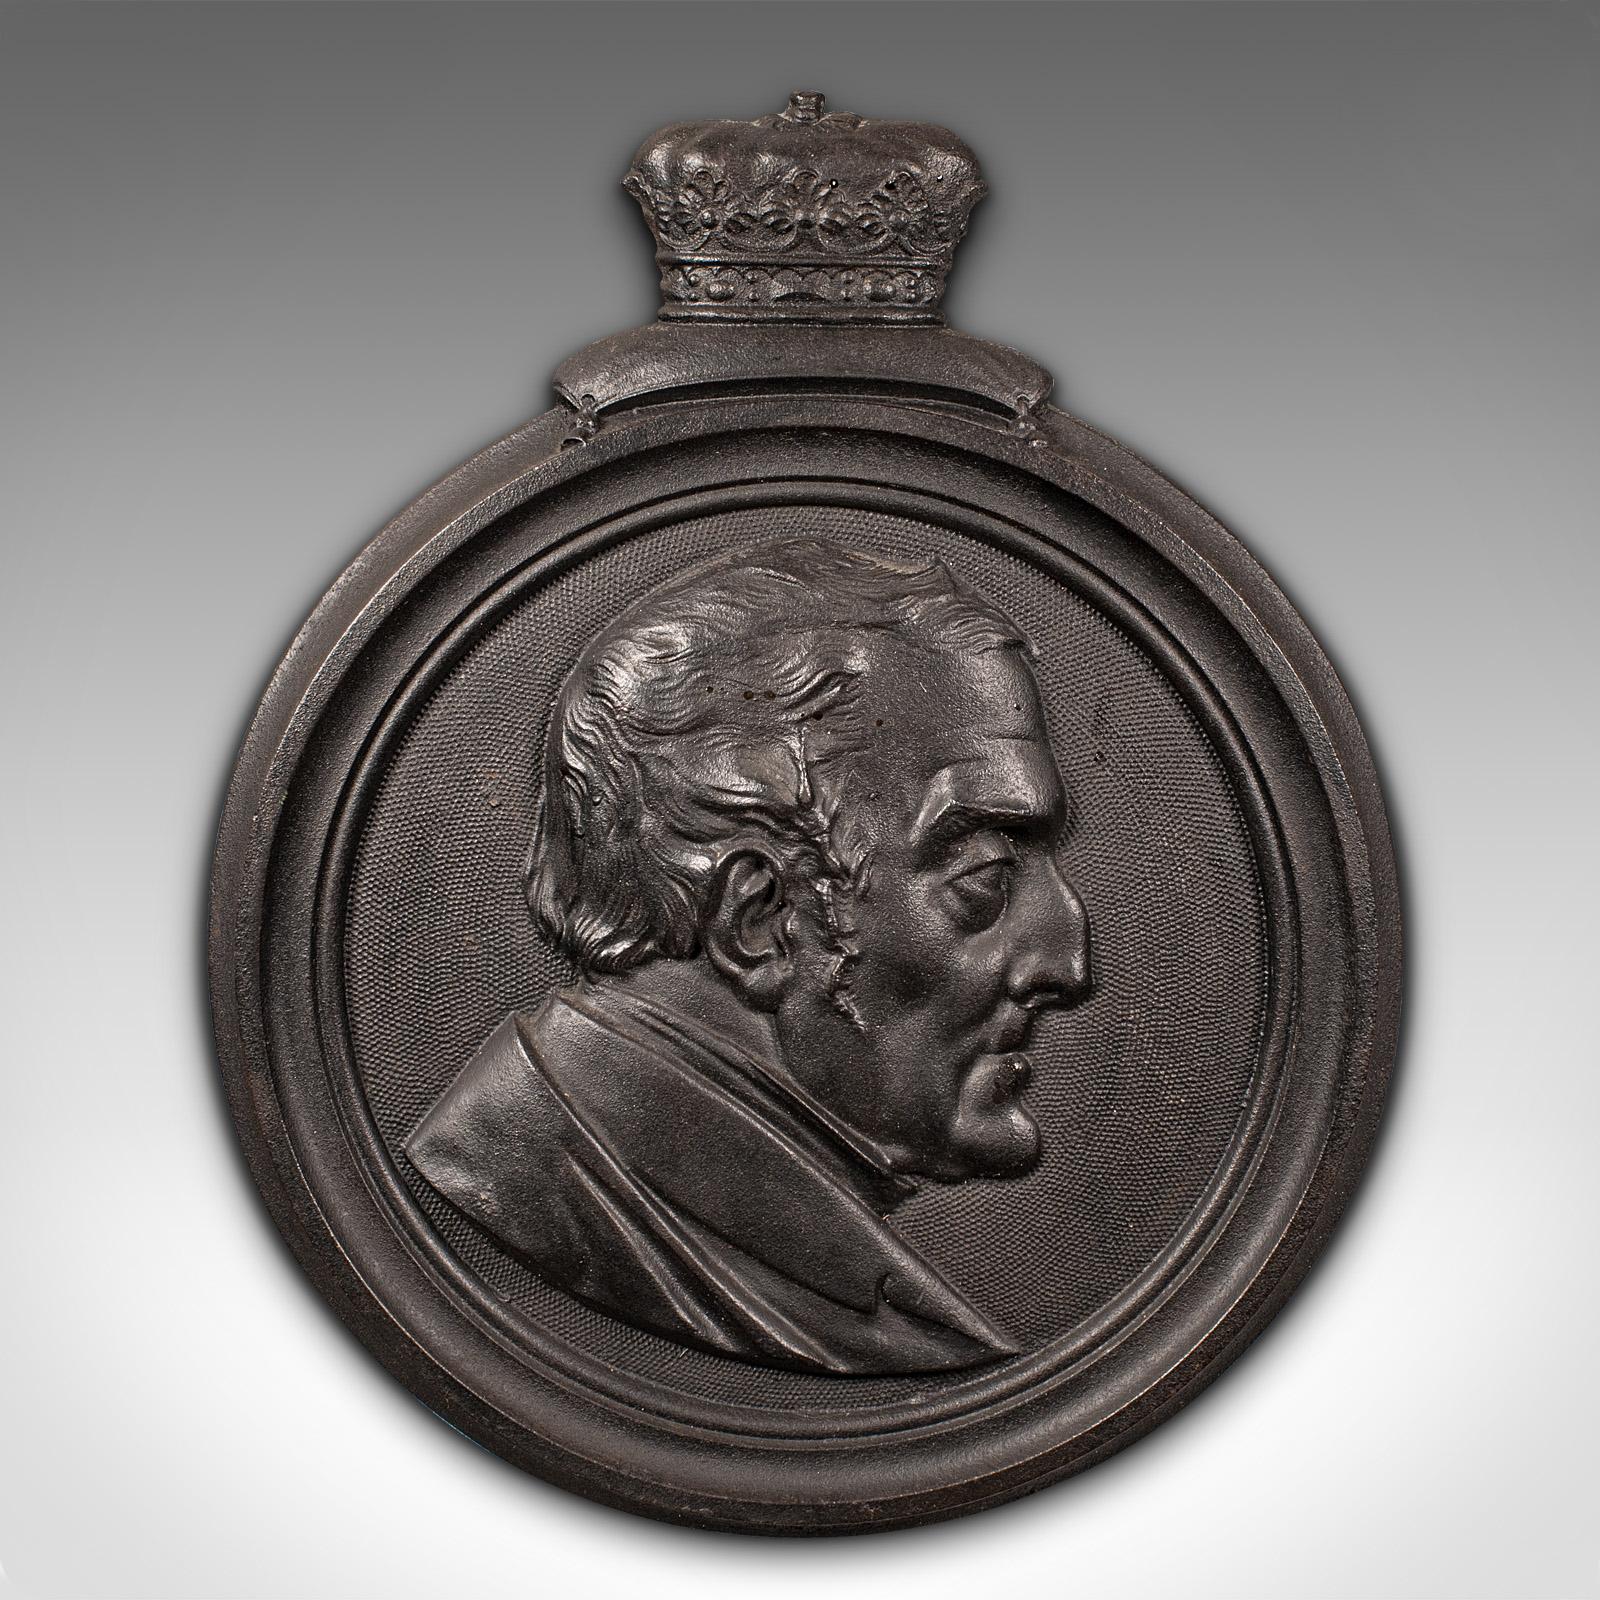 This is an antique cameo wall plaque. An English, cast iron portrait of the 1st Duke of Wellington, dating to the Victorian period, engraved 1854.

Arthur Wellesley (1769 - 1852) was the first Duke of Wellington from 1814 until his death, when the